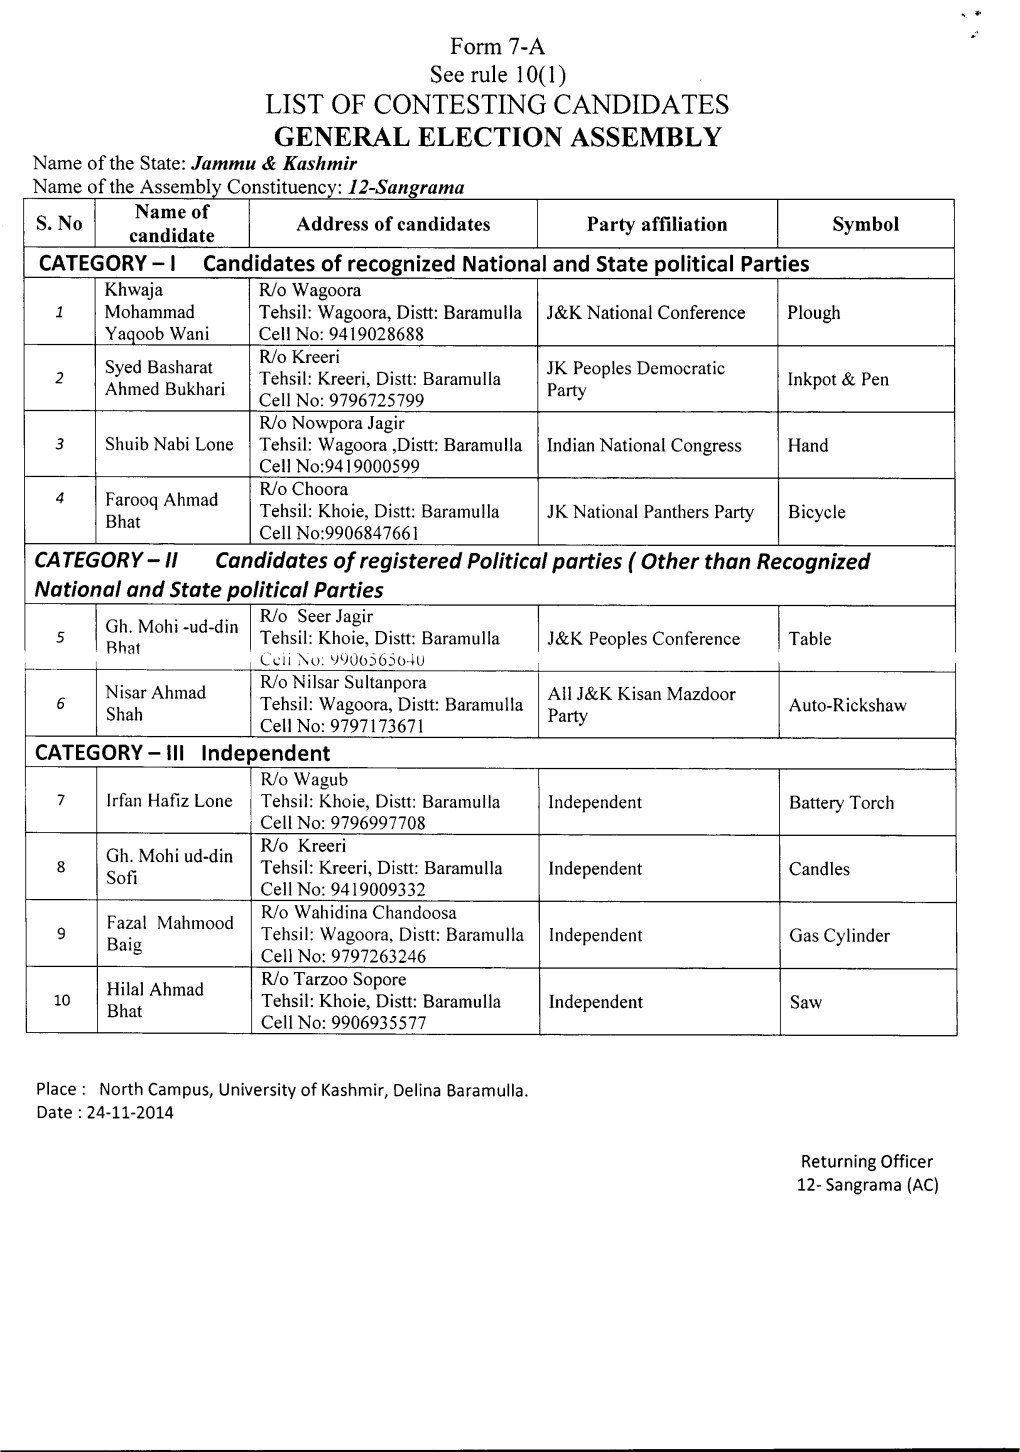 List of Contesting Candidates General Election Assembly